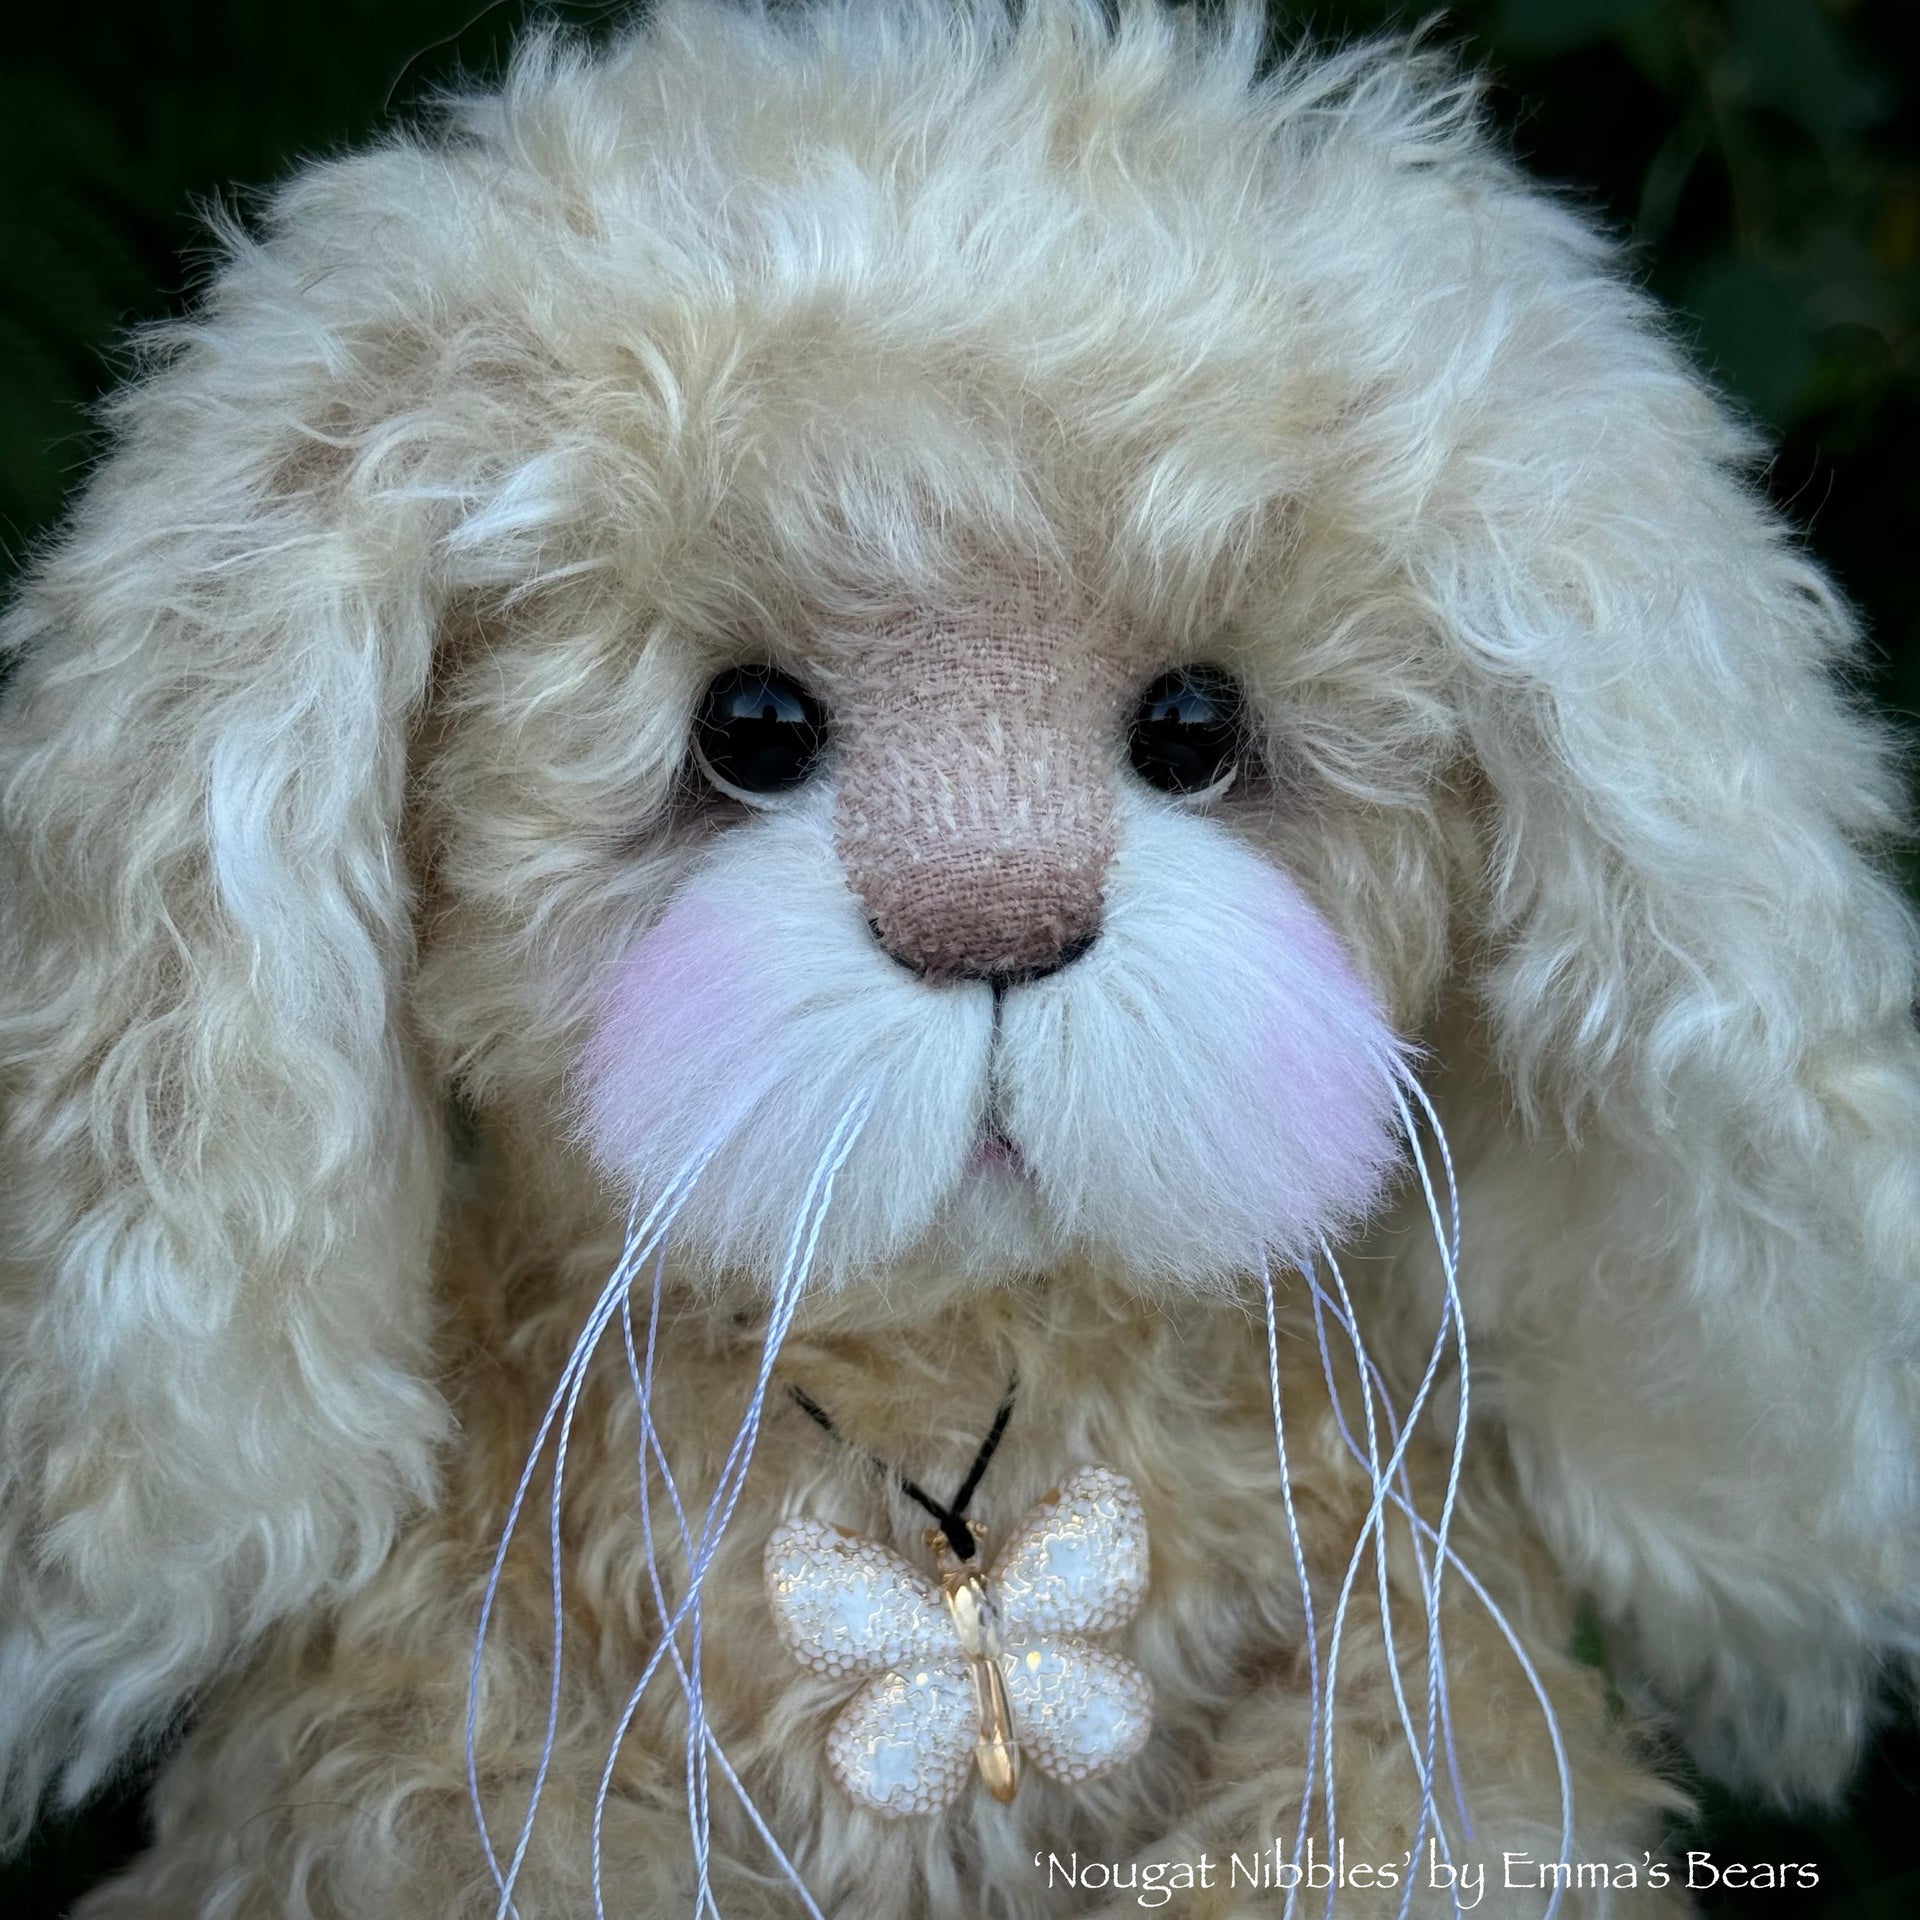 Nougat Nibbles - 12" Hand-Dyed Kid Mohair EASTER Bunny by Emma's Bears - OOAK